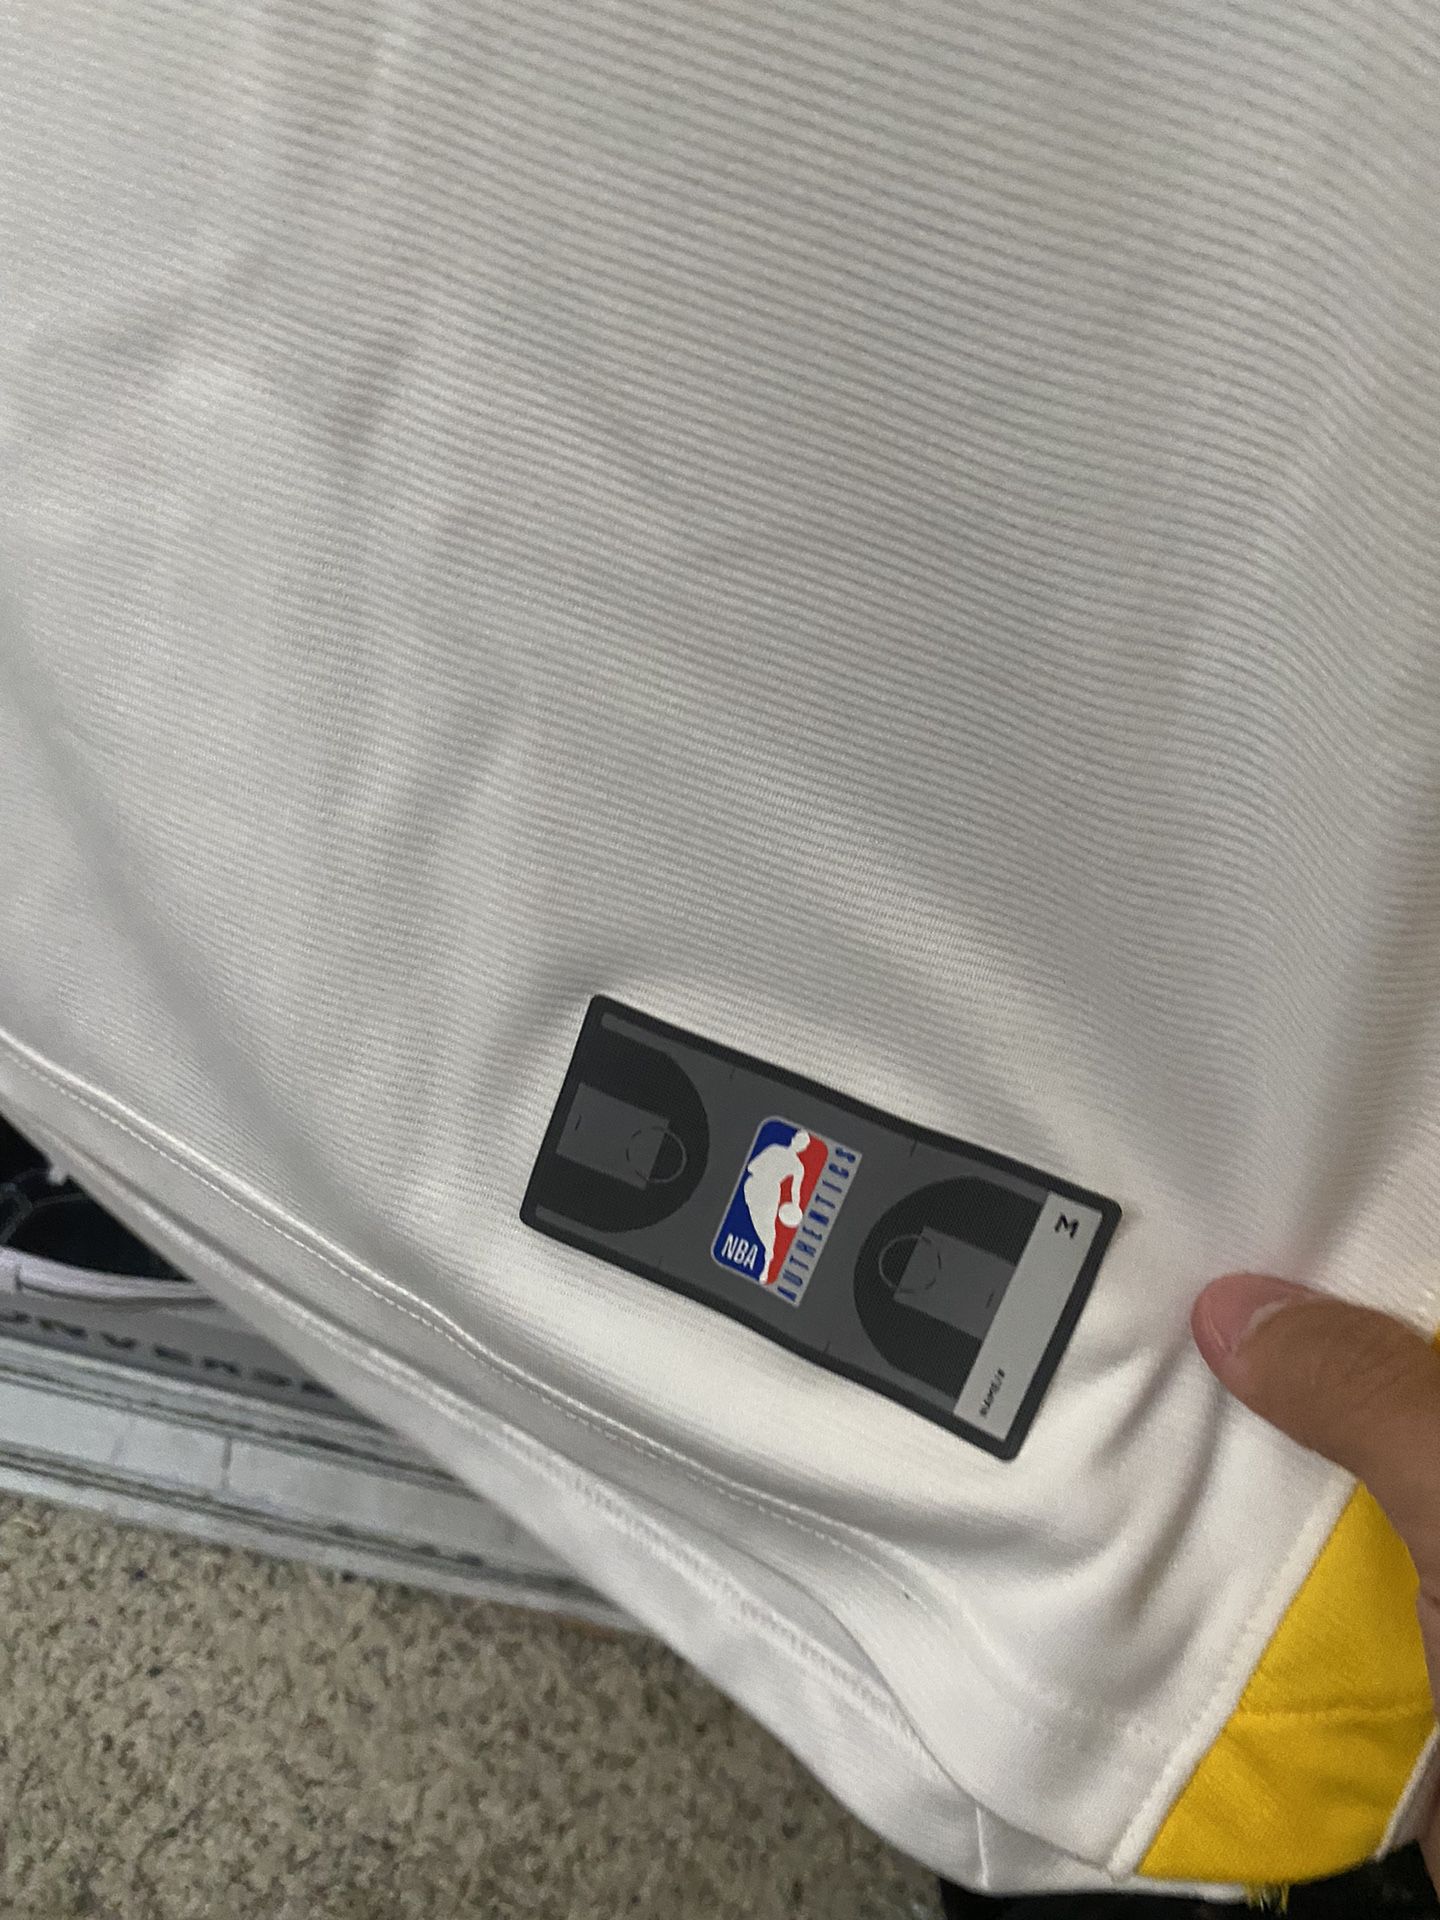 NBA Golden State Warriors Klay Thompson jersey for Sale in Riverside, CA -  OfferUp